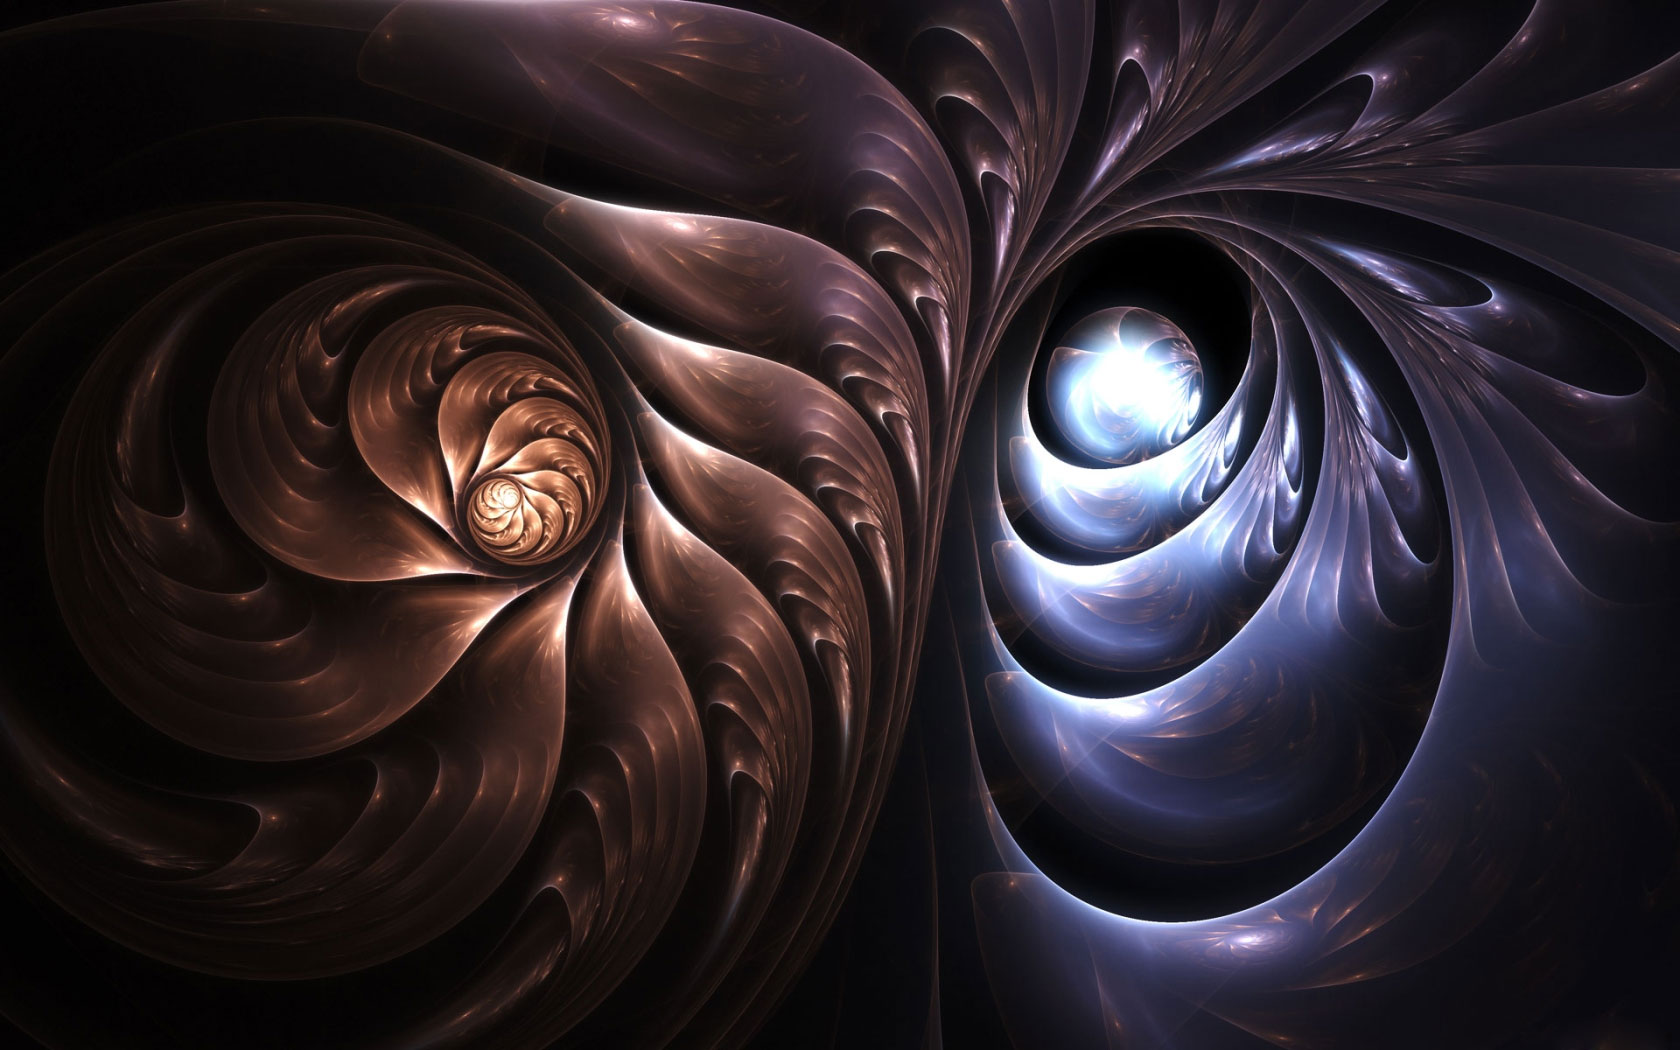 Nautilus Abstract Wallpaper - Hd Wallpapers For Windows 7 , HD Wallpaper & Backgrounds